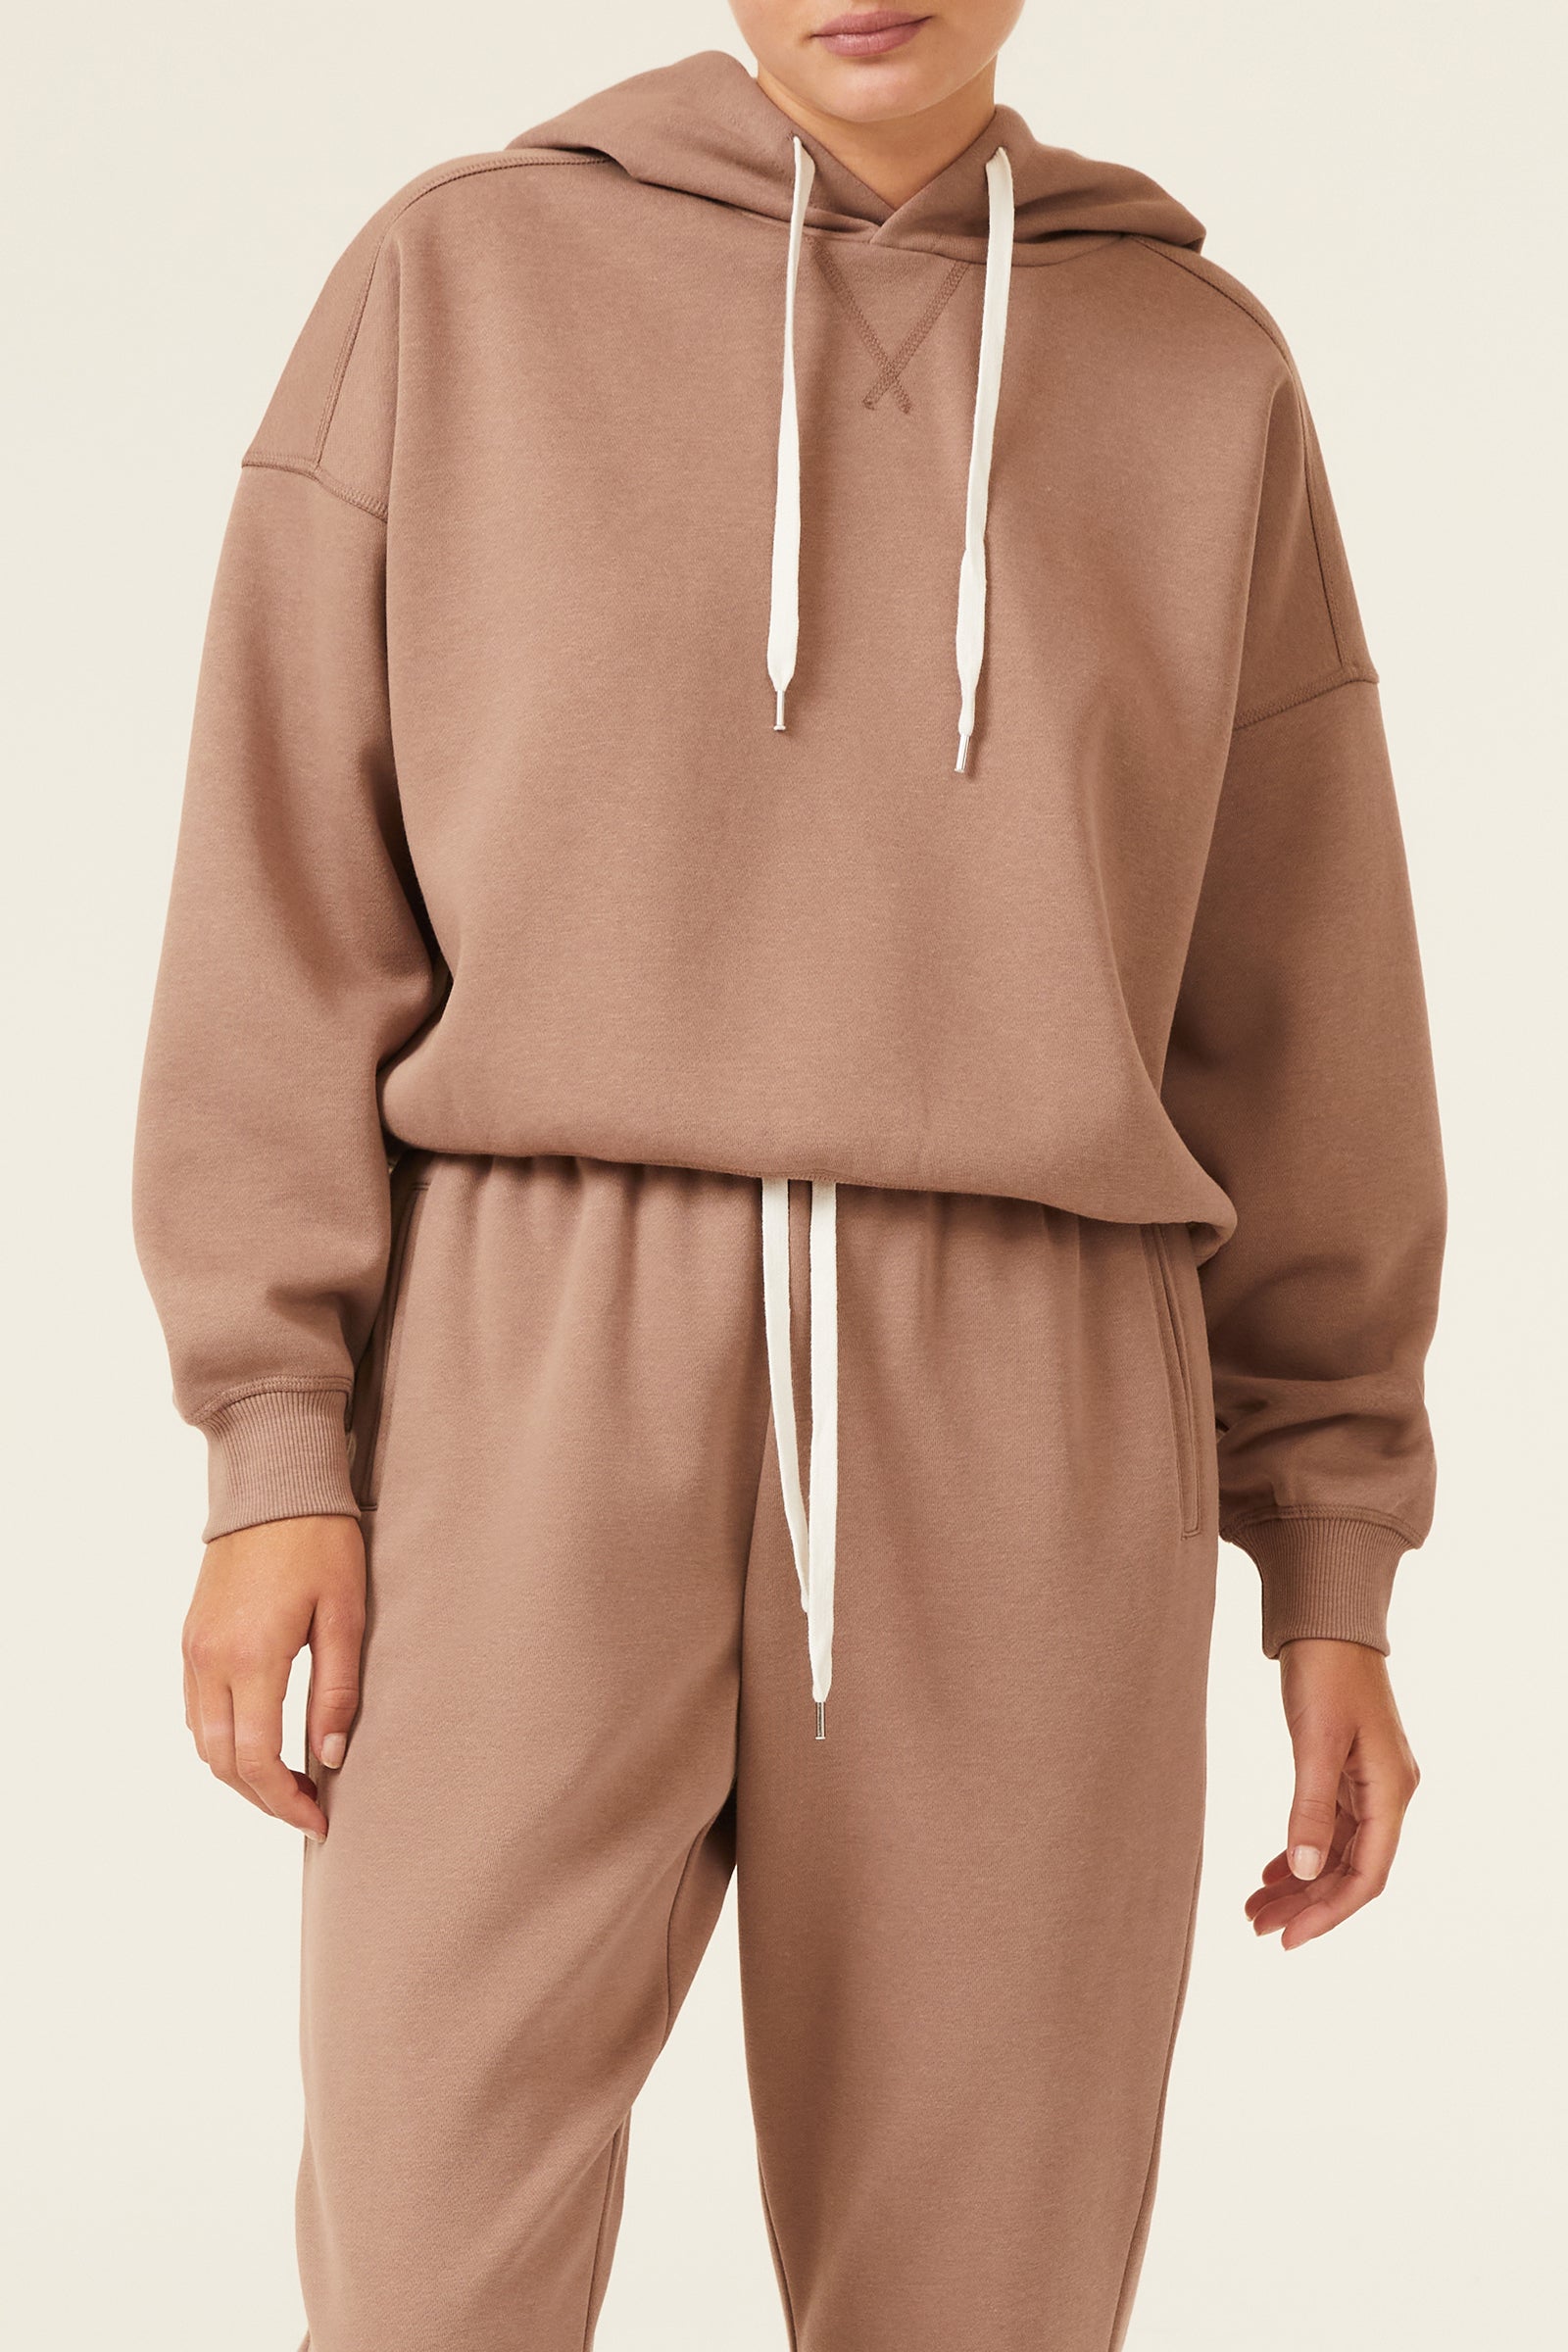 Nude Lucy Carter Classic Hoodie In A Brown Carob Colour 